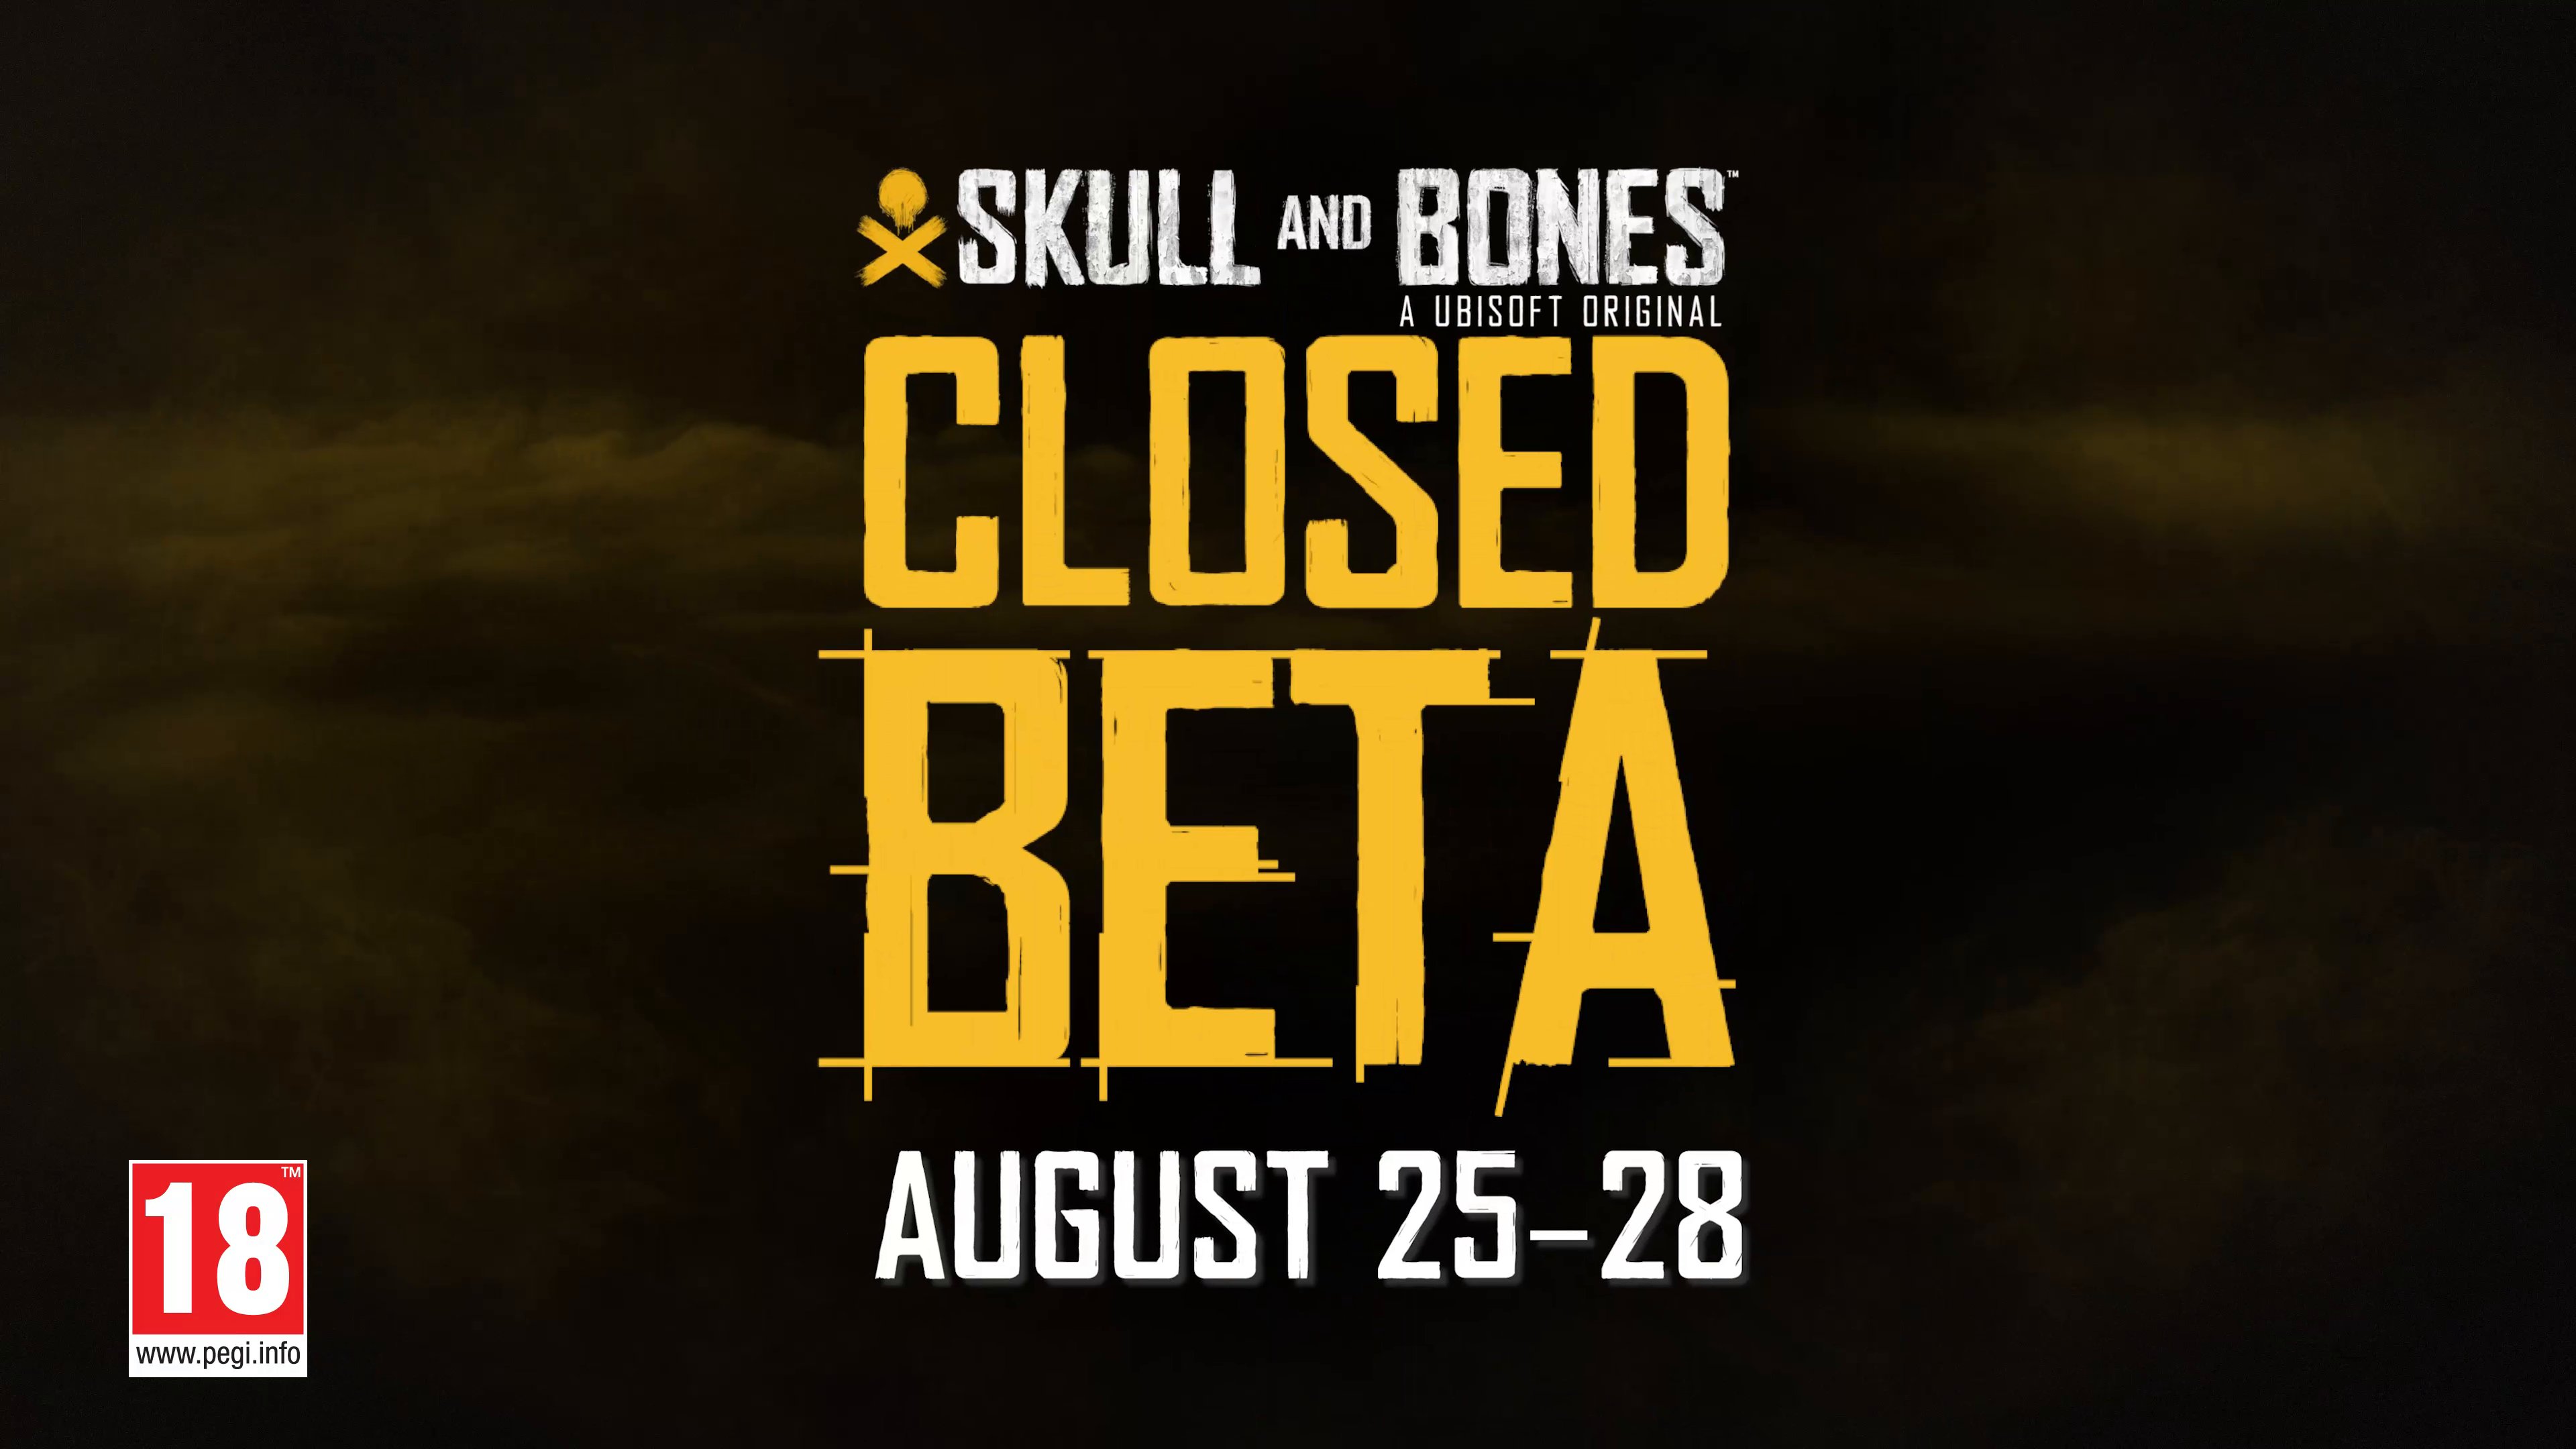 Skull And Bones - Join the Closed Beta